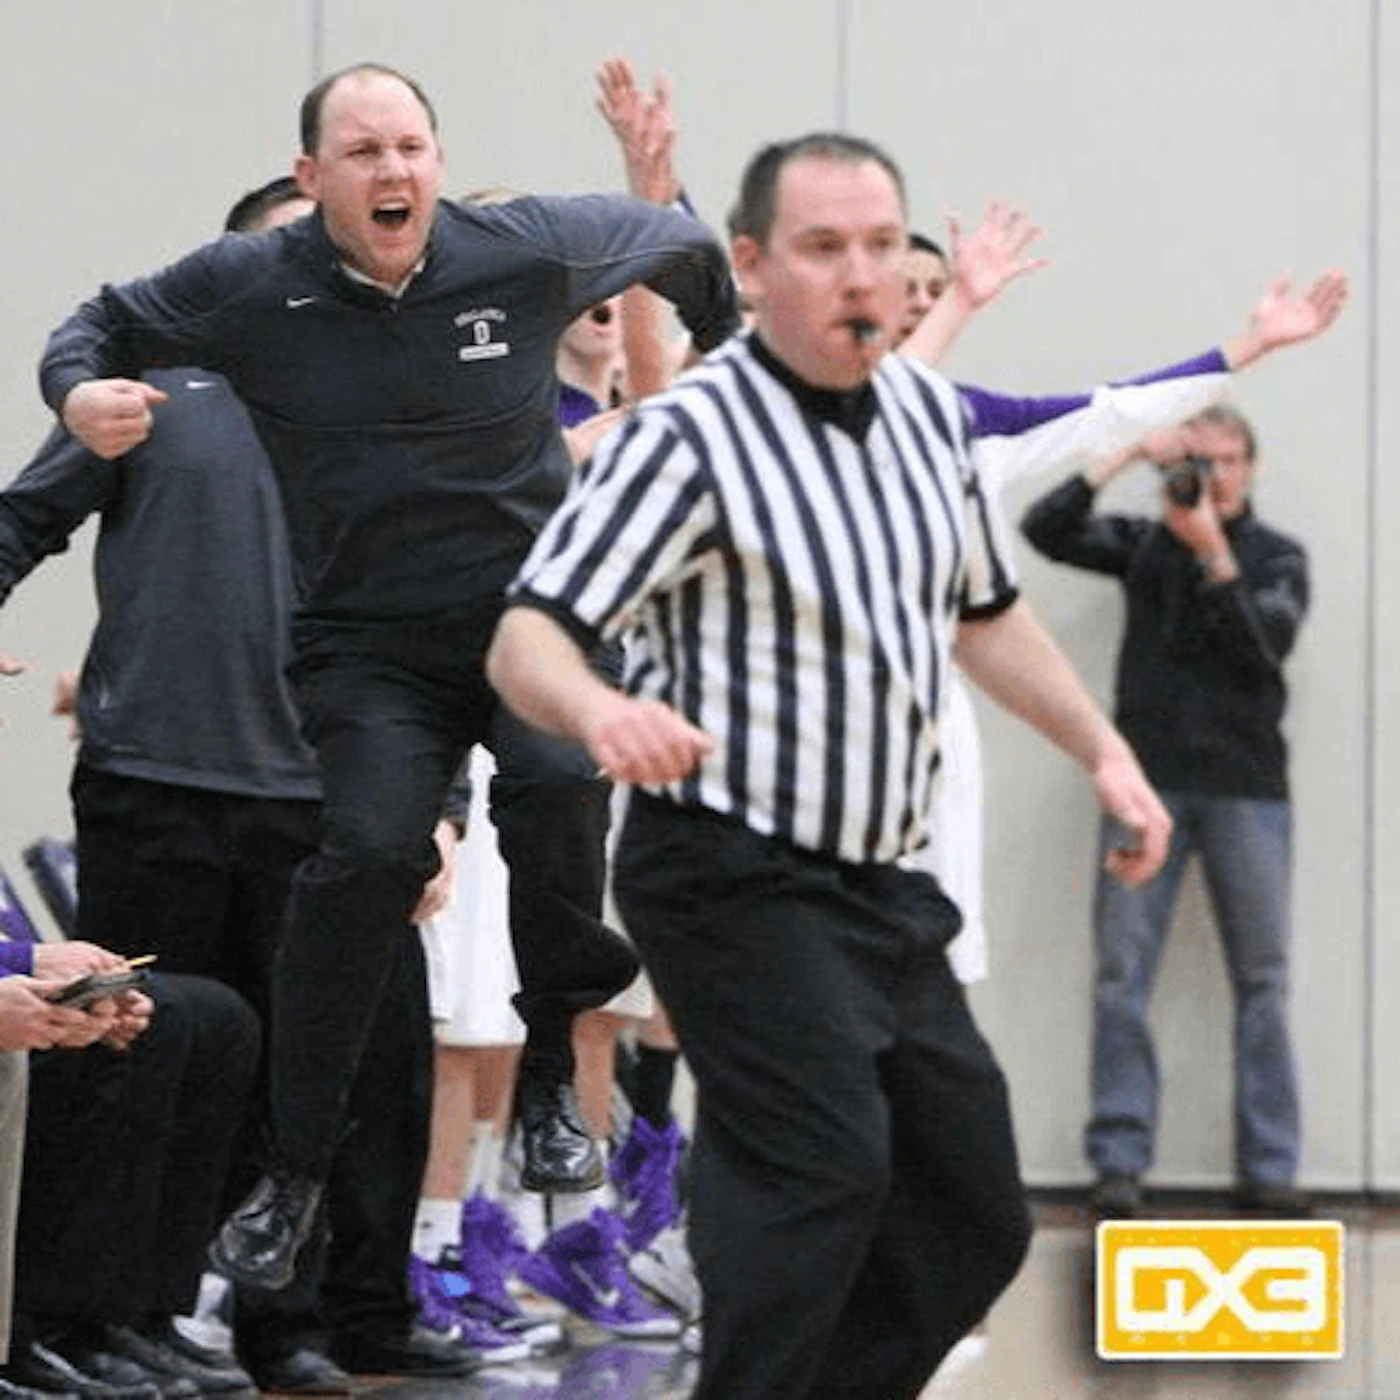 Matt Atkinson said there have been a lot of boos and jeers throughout his two decades officiating, but he still has a passion for the job.  Photo courtesy Matt Atkinson